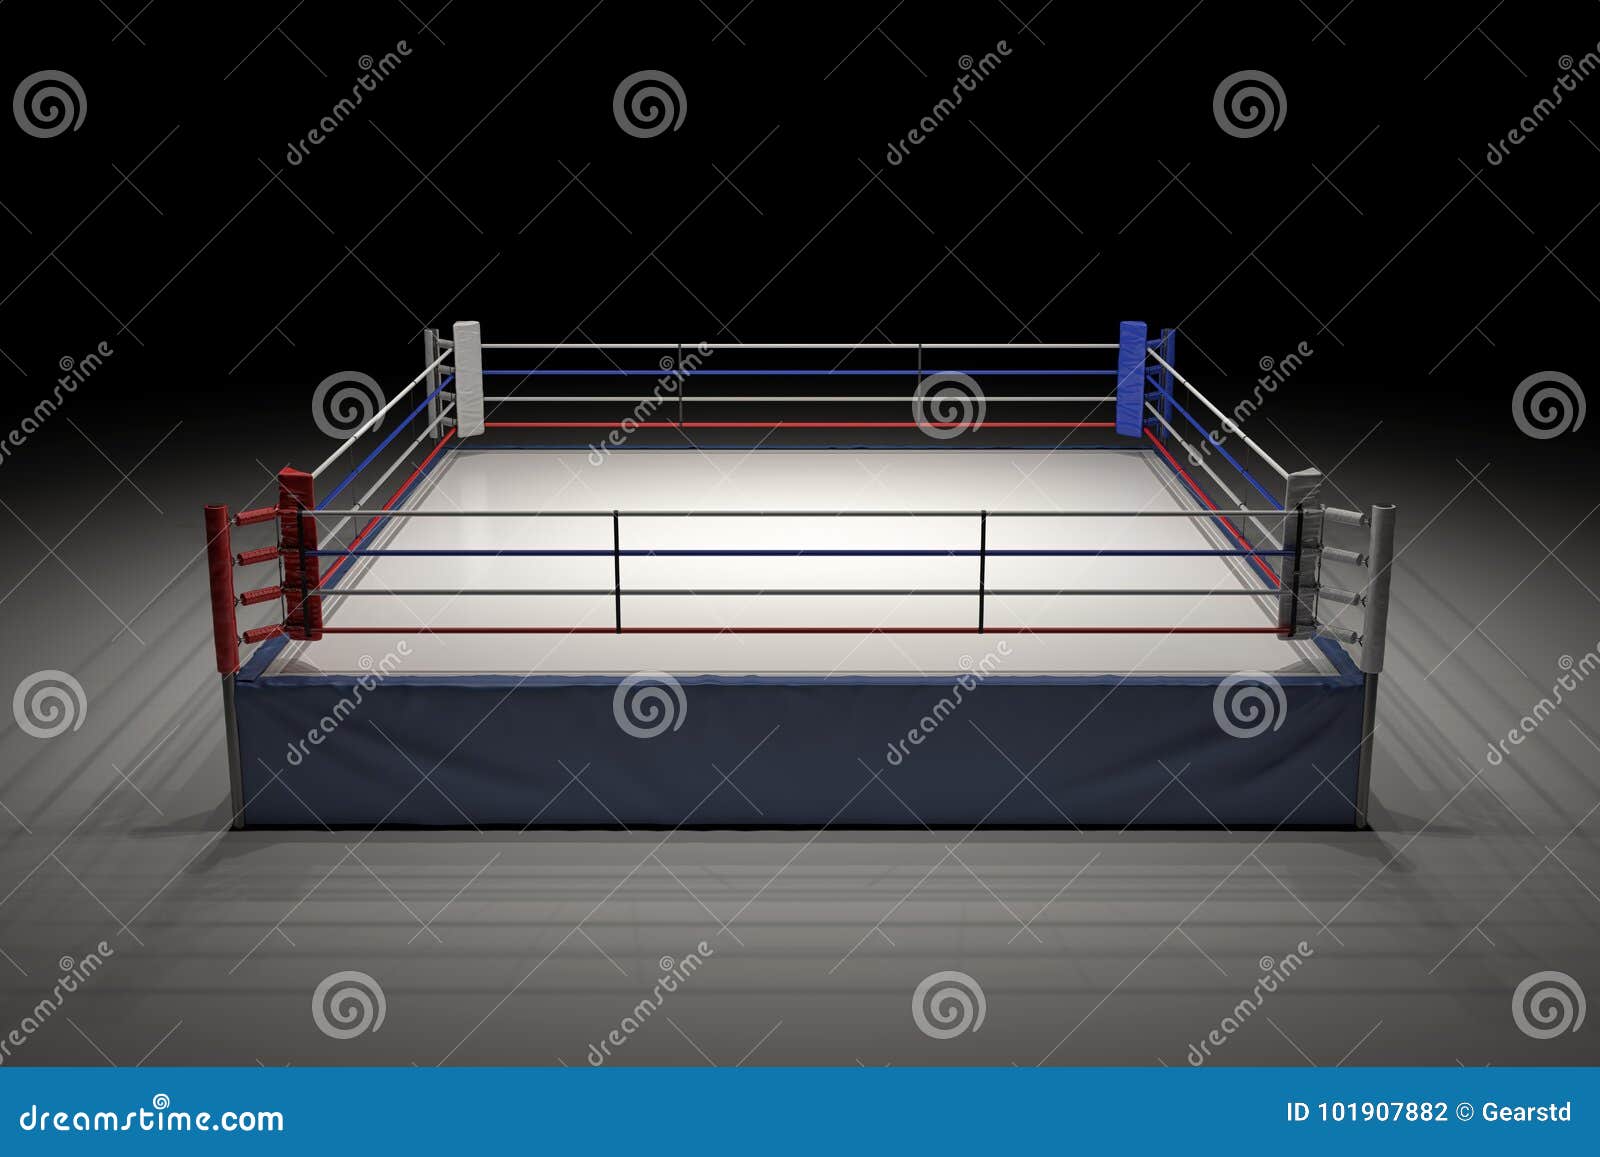 Boxing Ring Empty: Over 1,602 Royalty-Free Licensable Stock Illustrations &  Drawings | Shutterstock